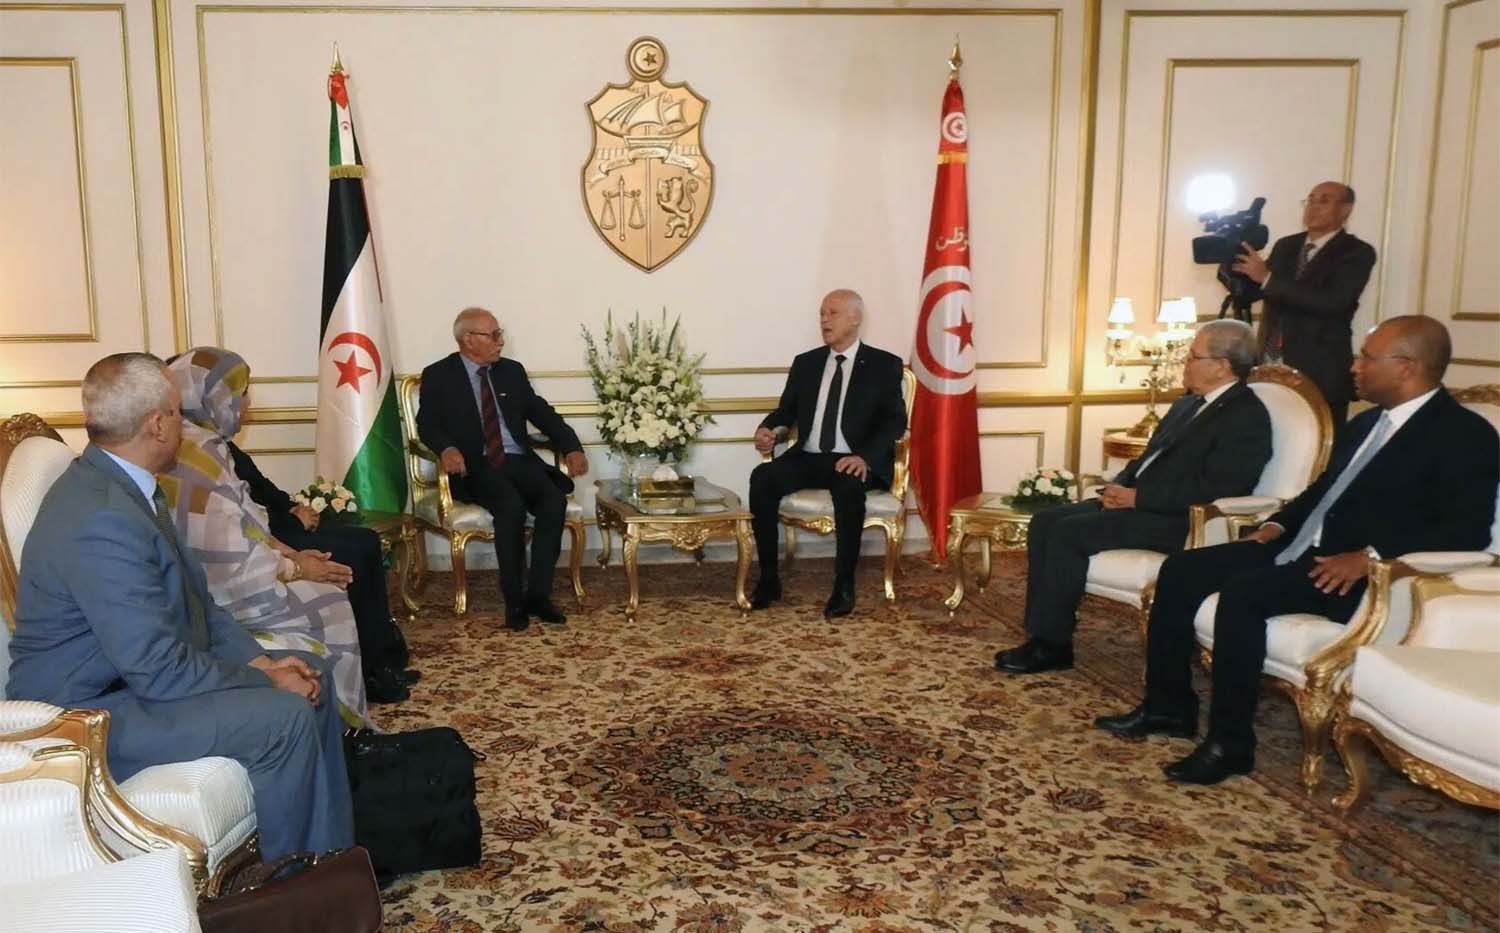 Morocco said Tunisia’s decision to host Ghali confirms its hostility in a blatant way